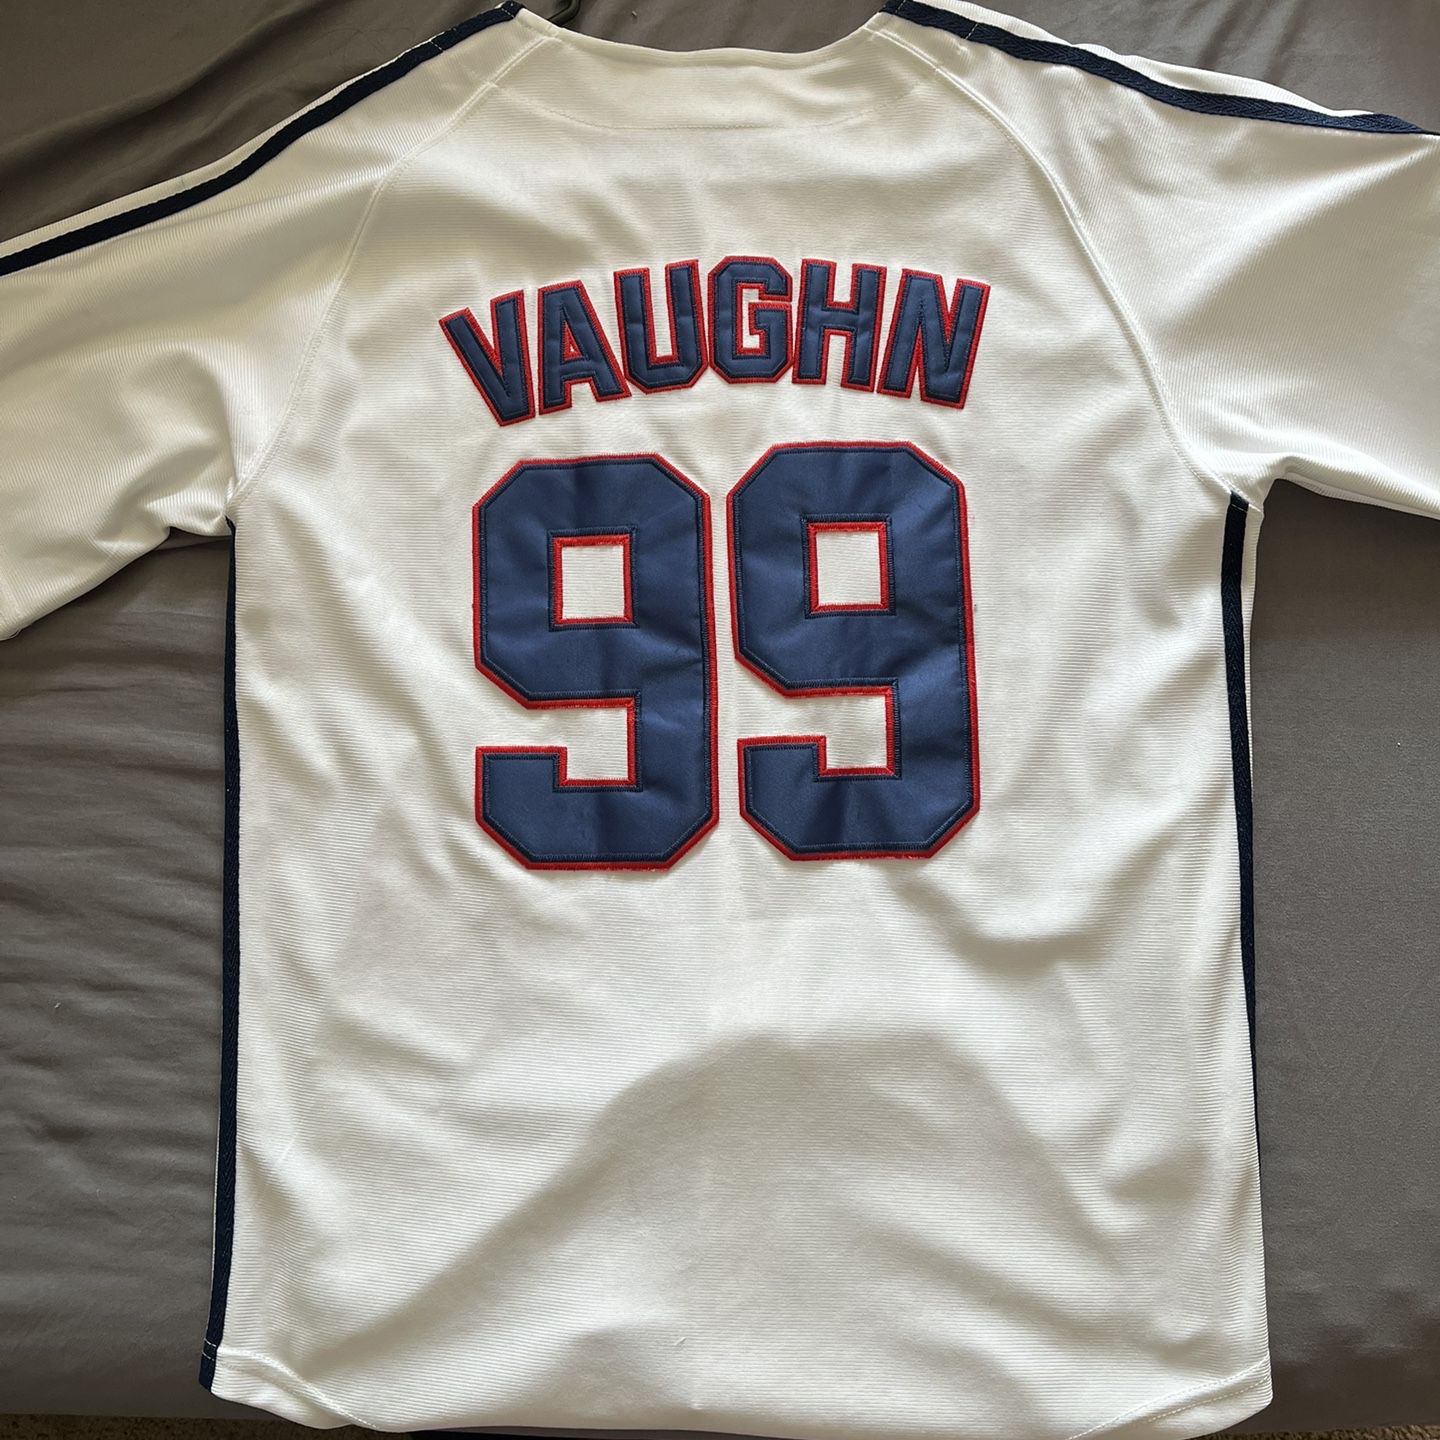 Ricky Vaughn Jersey (major League) for Sale in Parma Heights, OH